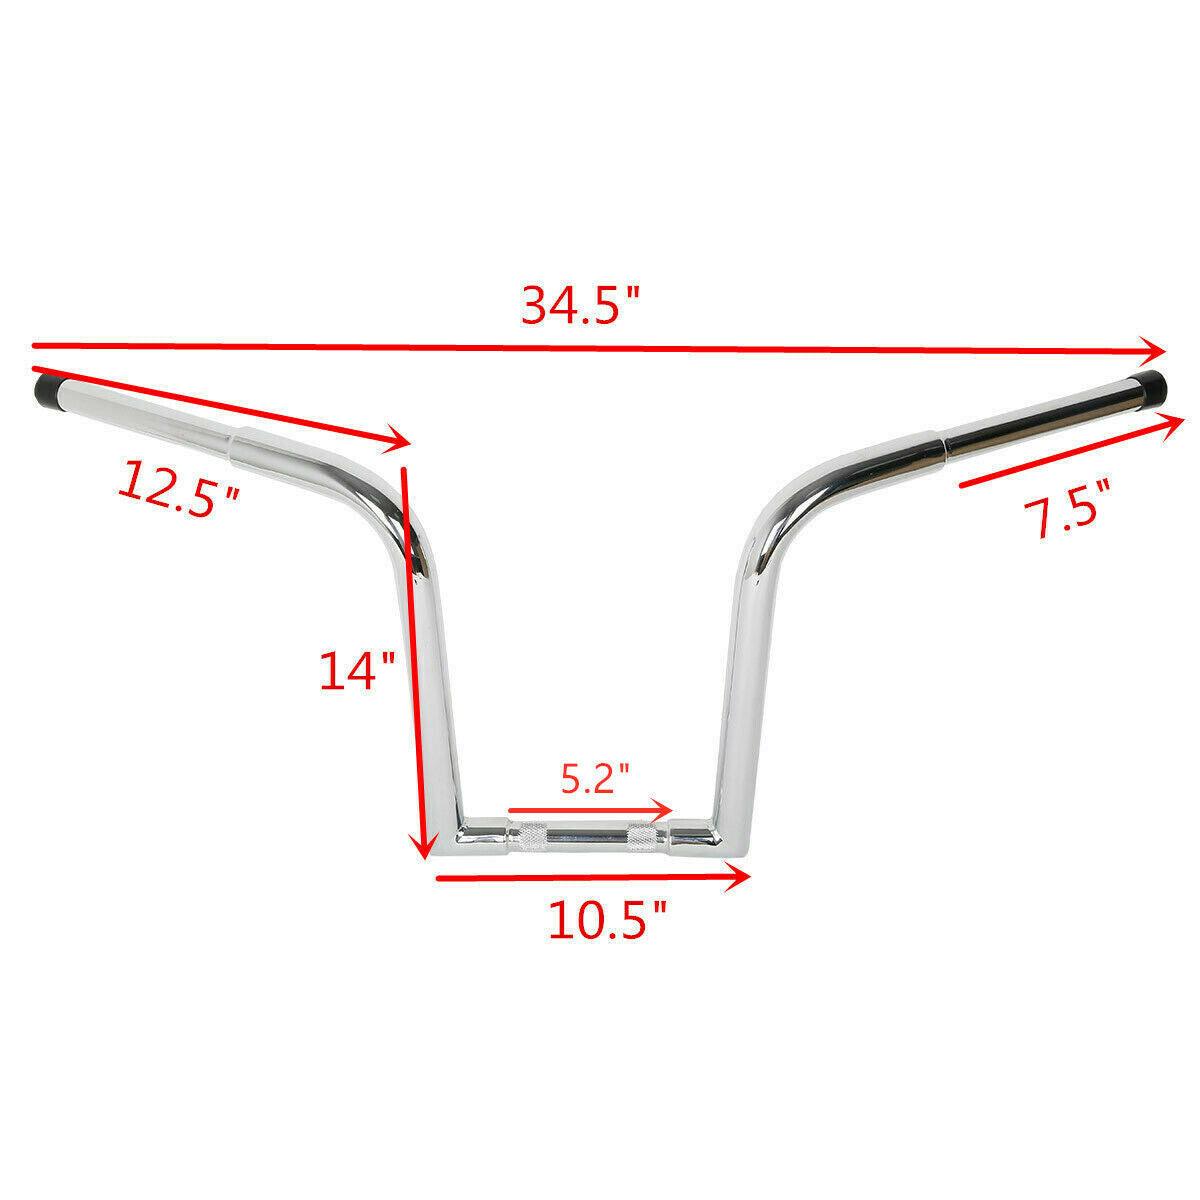 Chrome Ape Hangers Bars Fat 1-1/4" 14" Rise Handlebar Fit For Harley FLST FXST - Moto Life Products